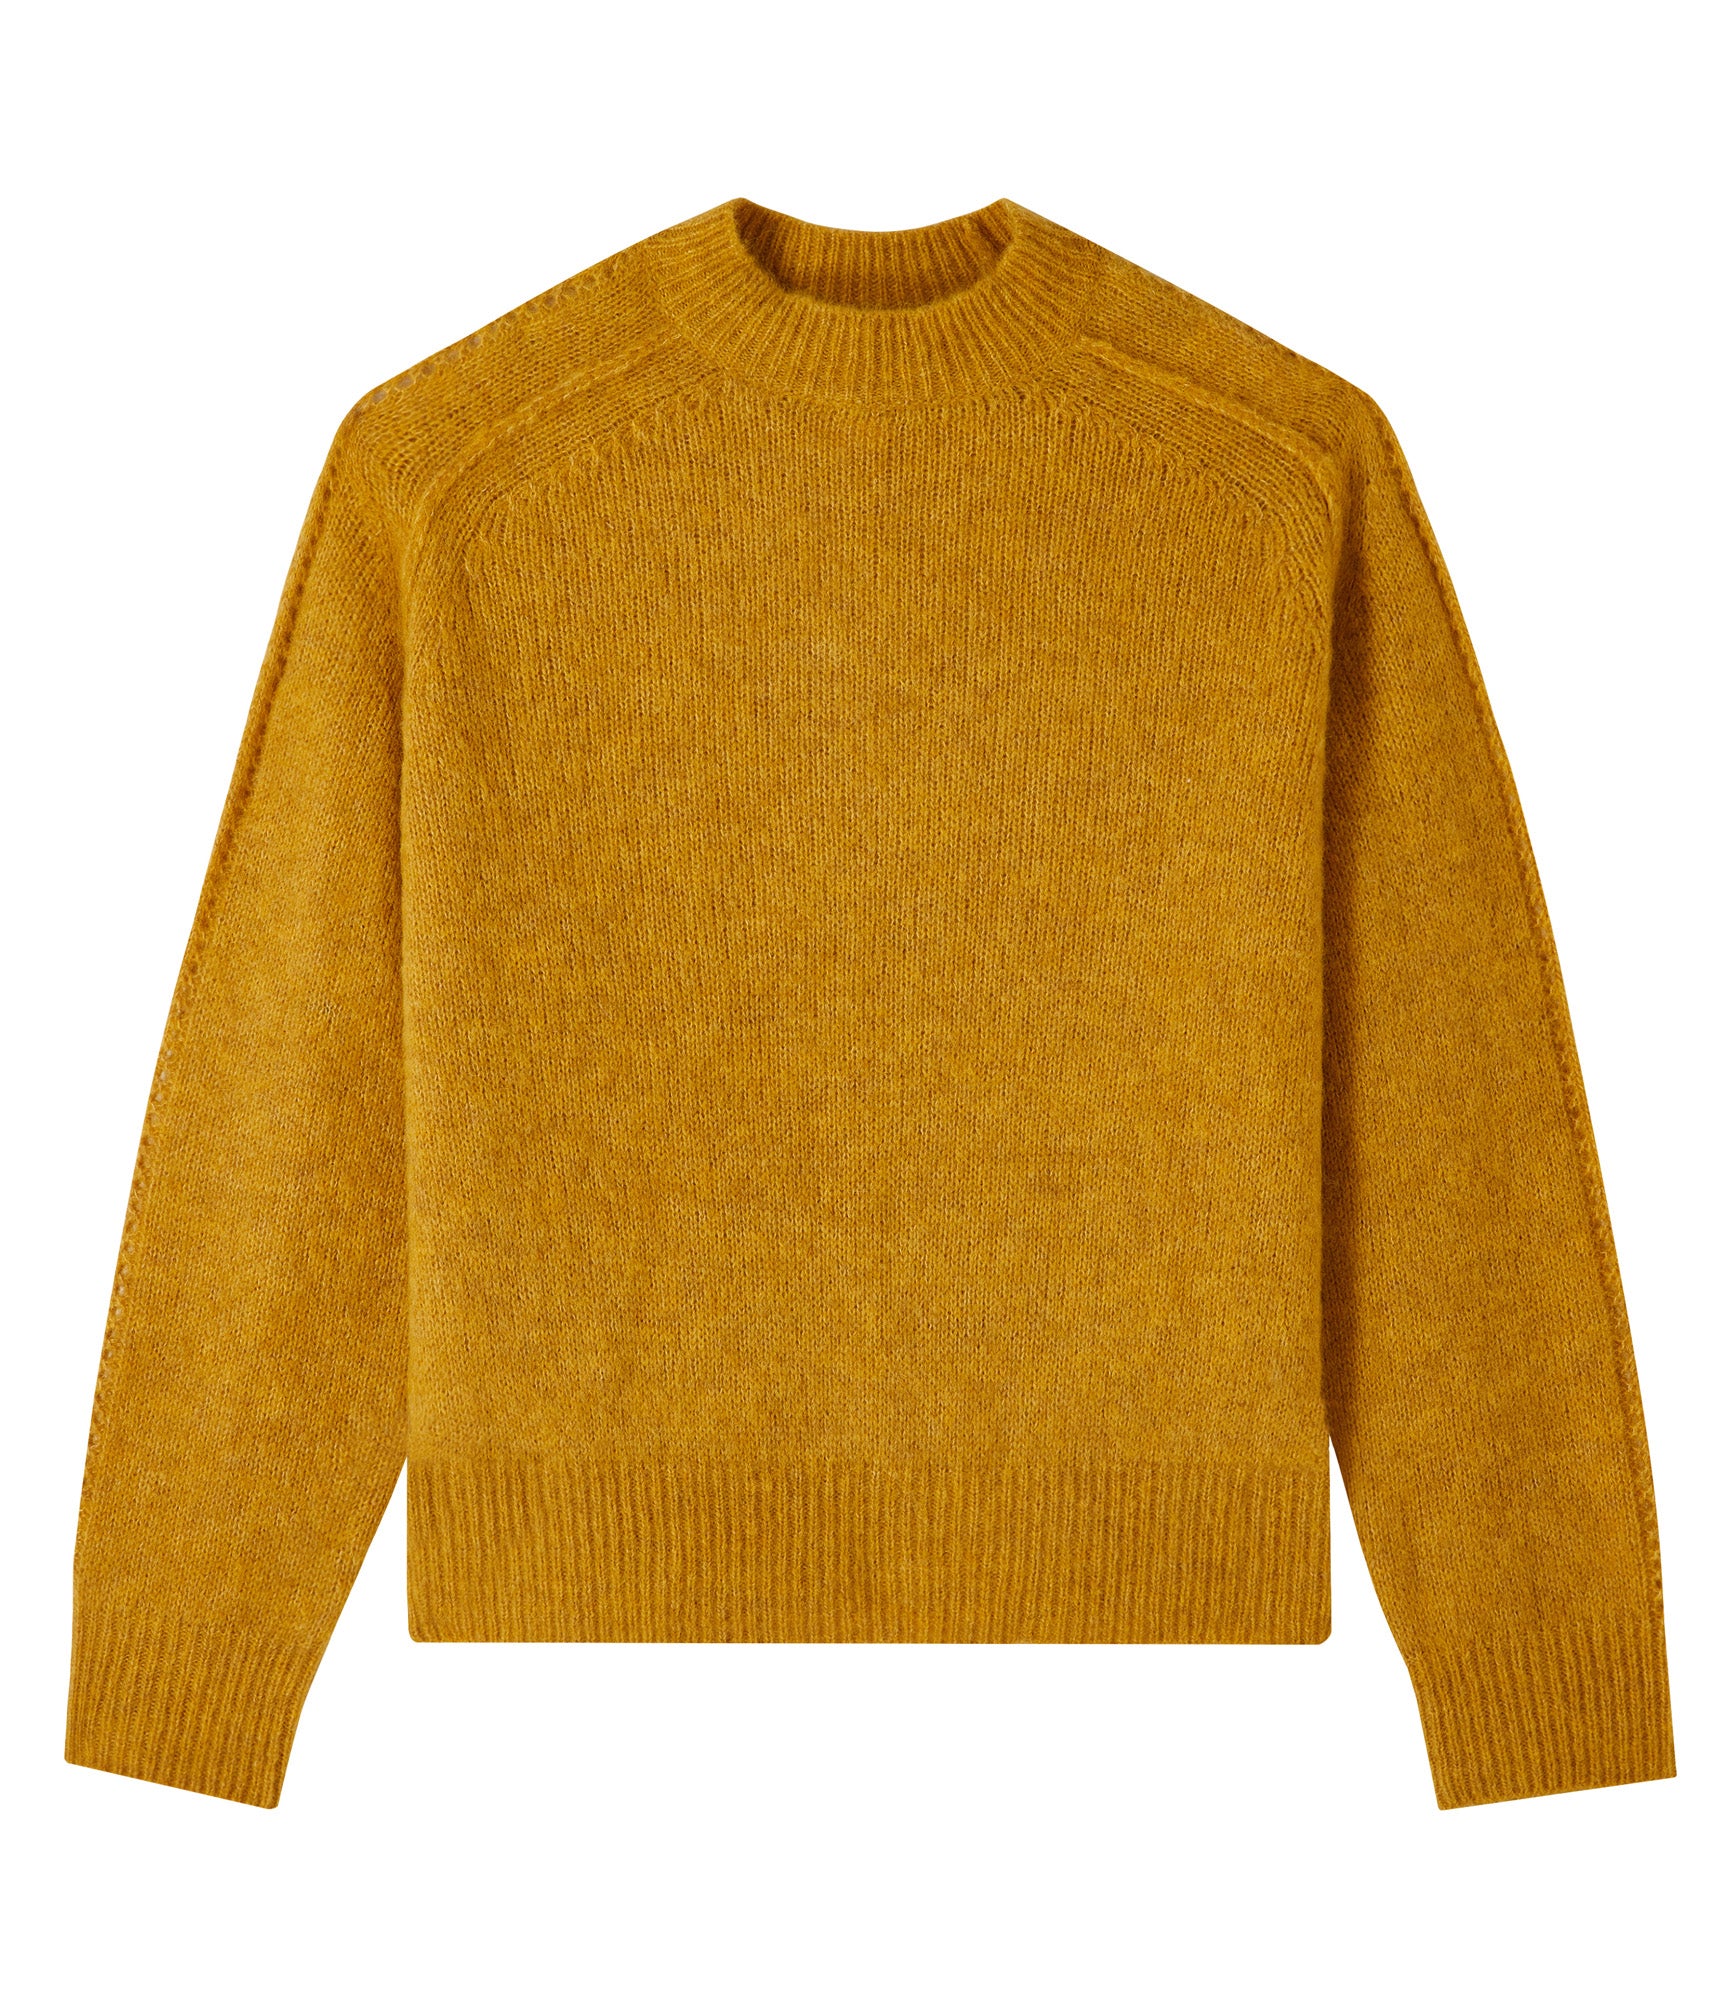 LOYAL Men's Pullover with Logo in Mustard Yellow